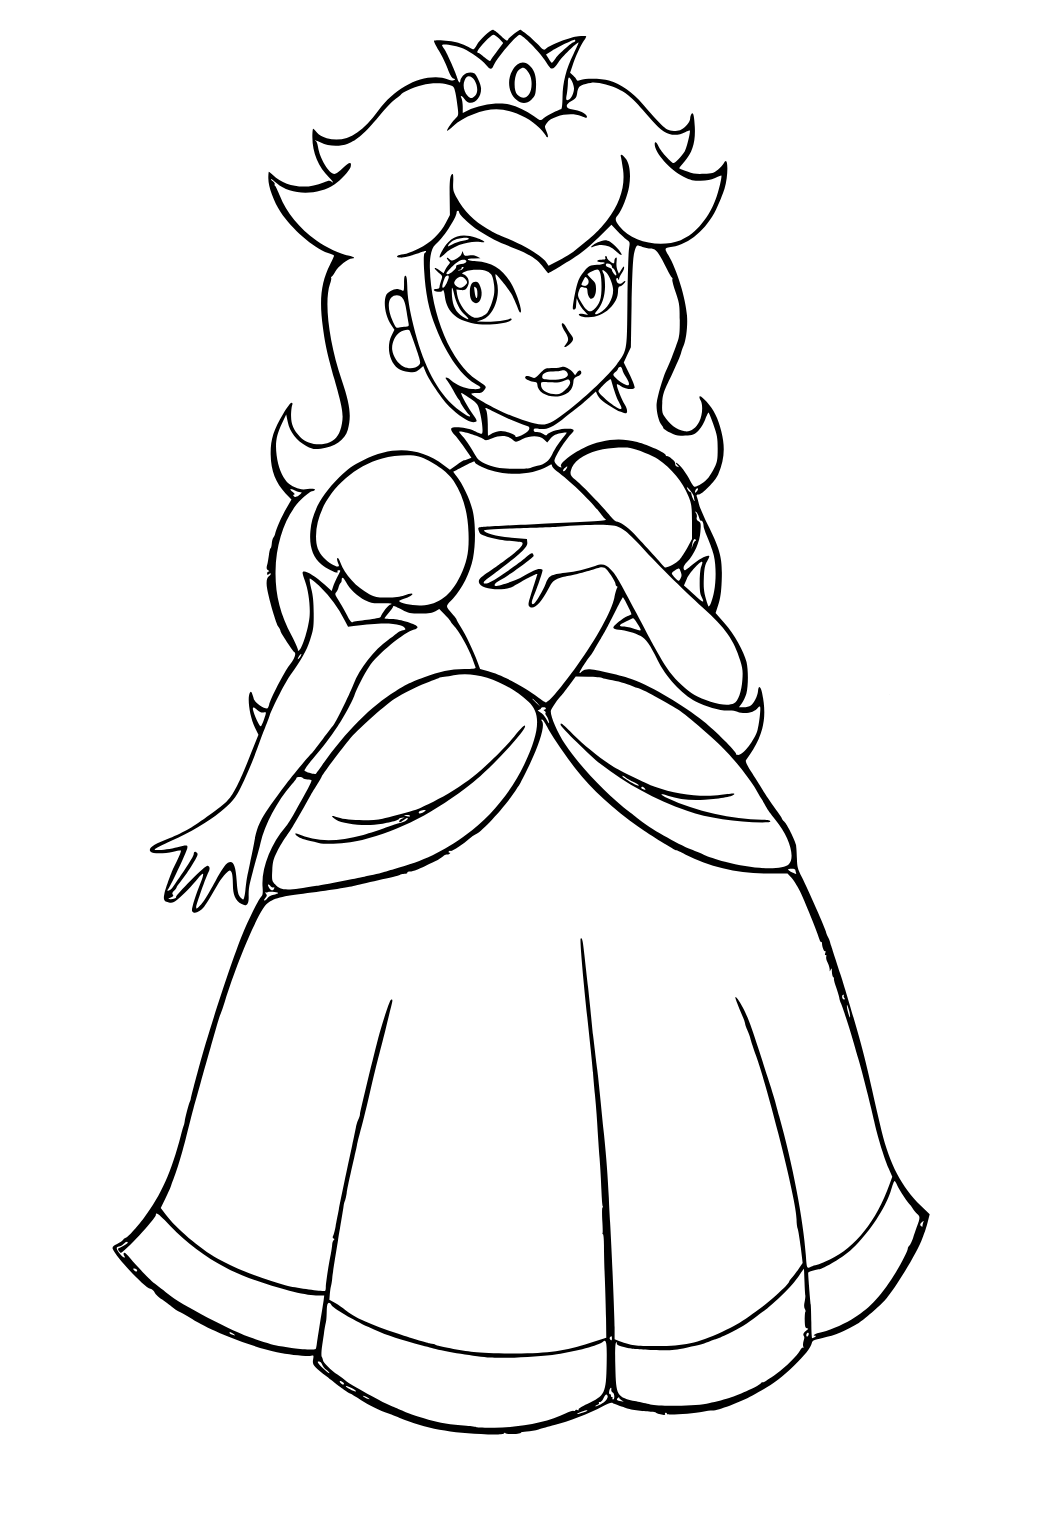 Free printable princess daisy astonishment coloring page for adults and kids